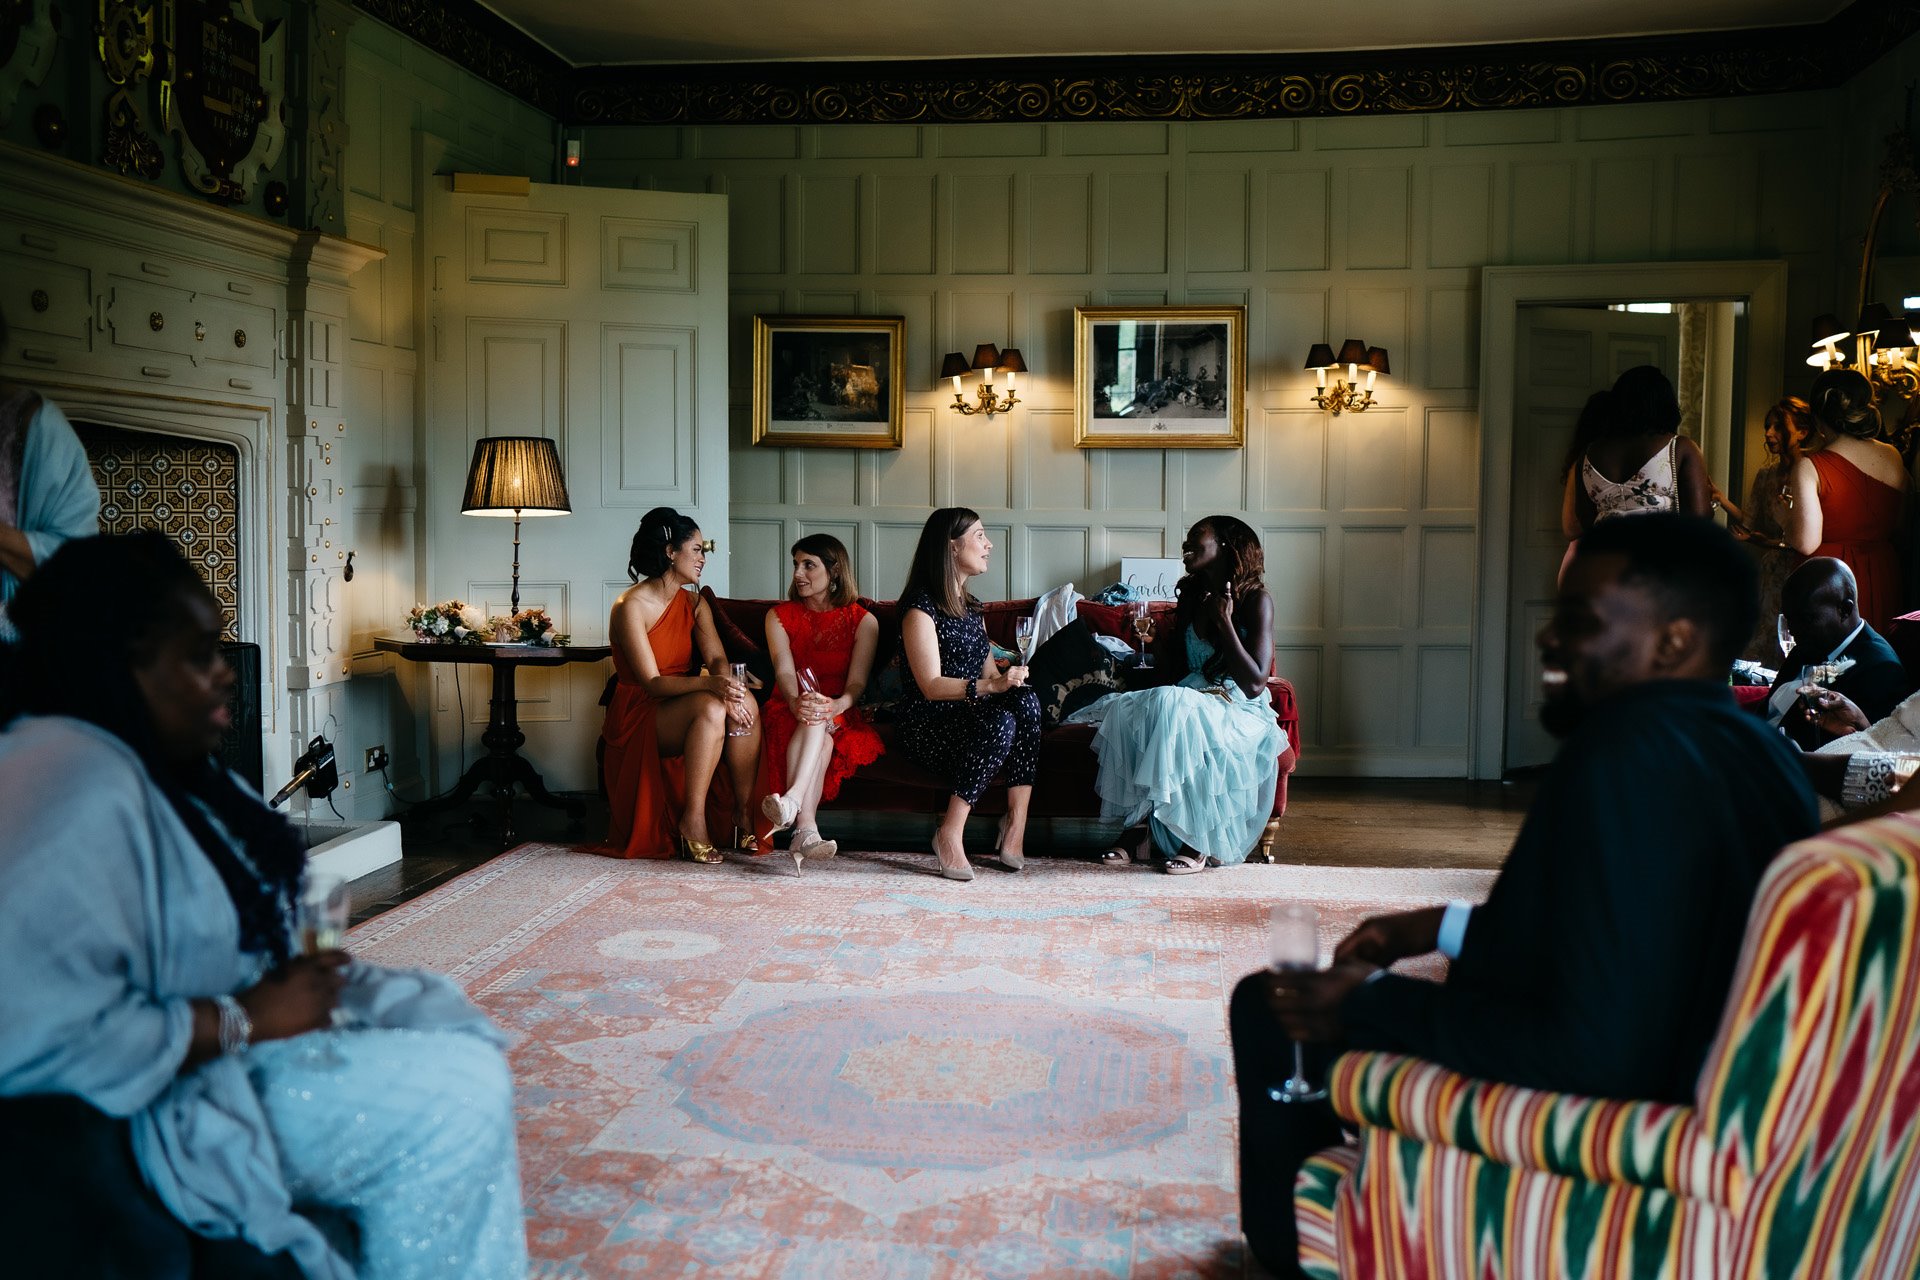 Wedding guests getting comfy in the drawing room at Elmore Court wedding fair in September